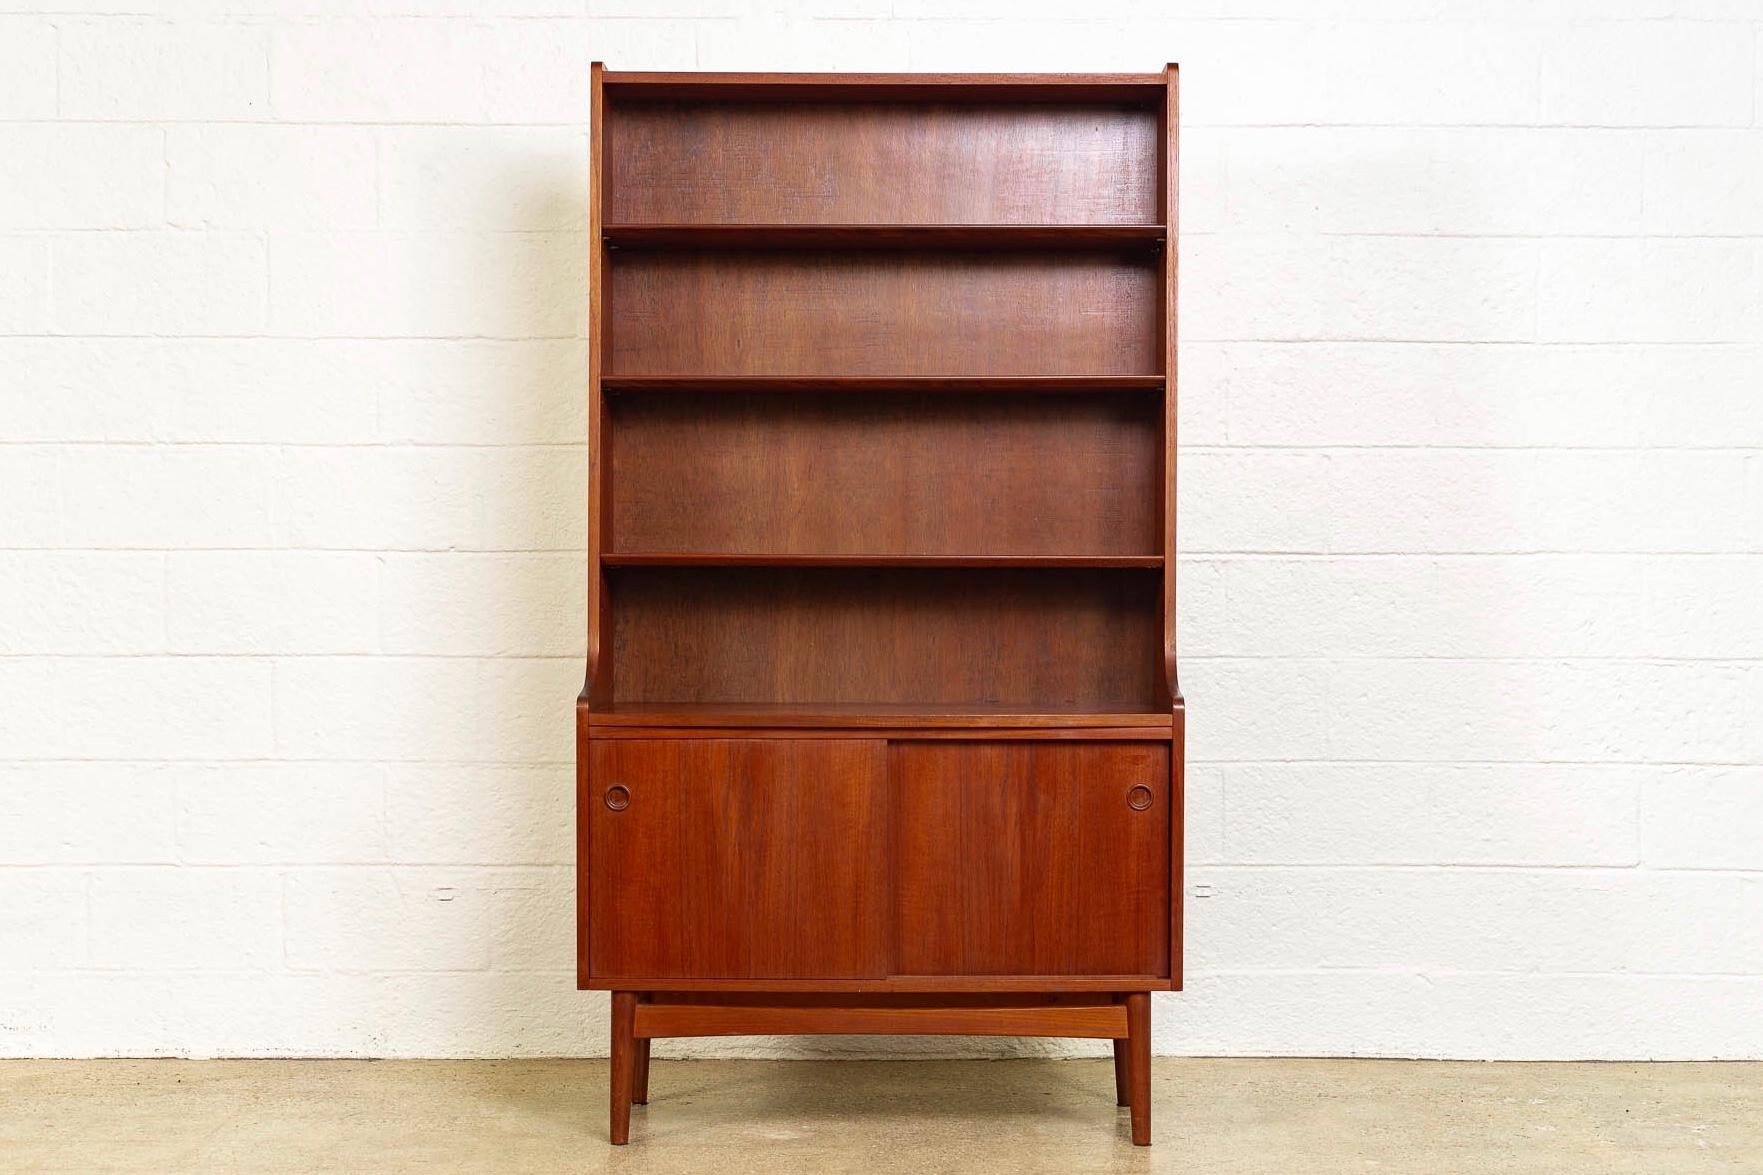 This vintage Mid-Century Modern bookcase designed by Johannes Sorth for Bornholms Møbelfabrik and made in Denmark circa 1960 has a Classic Danish modern design with clean, Minimalist lines. Well-constructed, the tall upper hutch features three